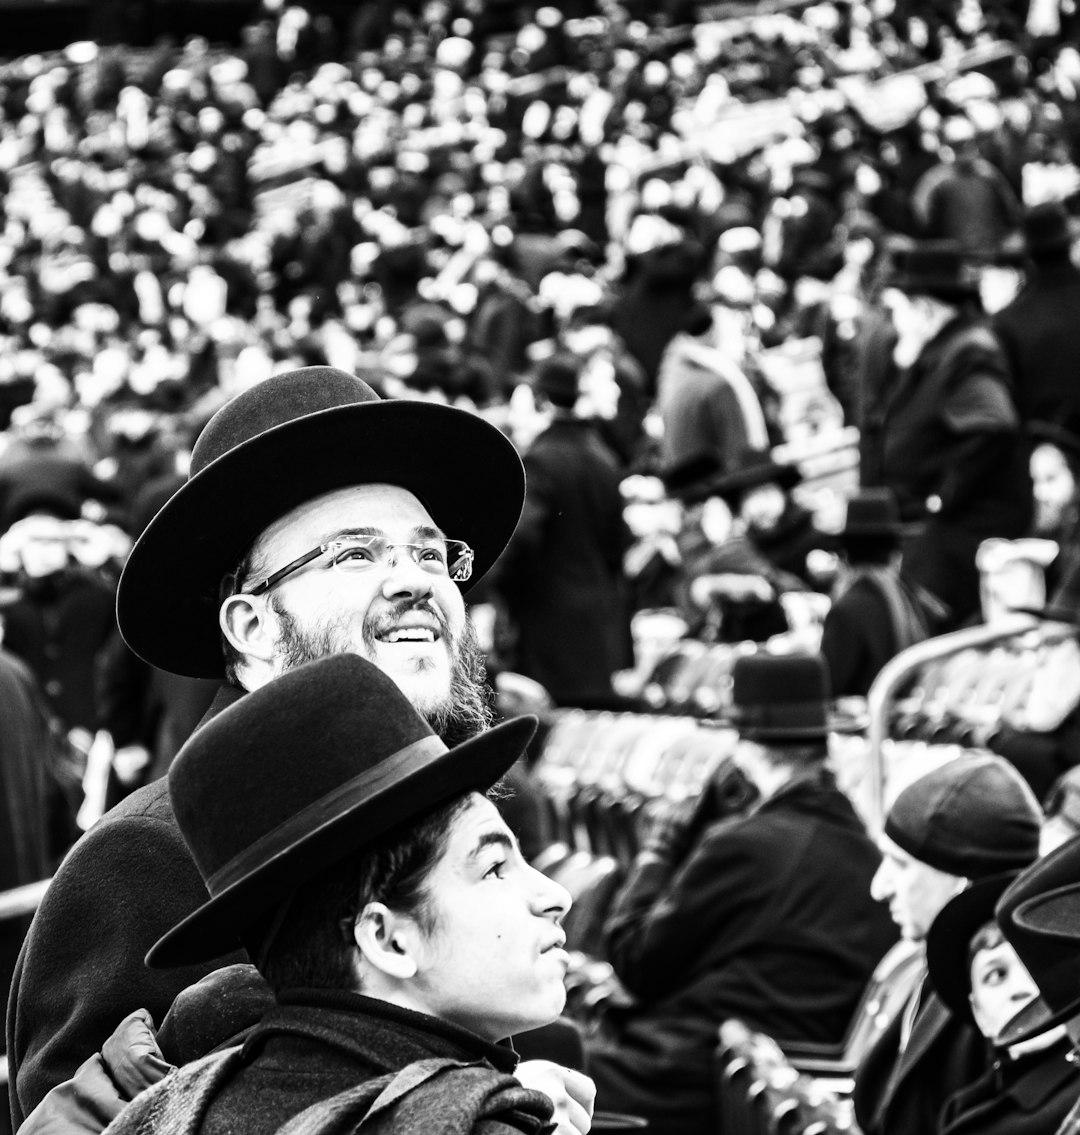 Taken at the 13th Siyum HaShash - a momentous occasion once every seven and a half years. The event brings together all groups of Jews as they celebrate the completion of the Talmud and its 2,711 Dafim (front and back)